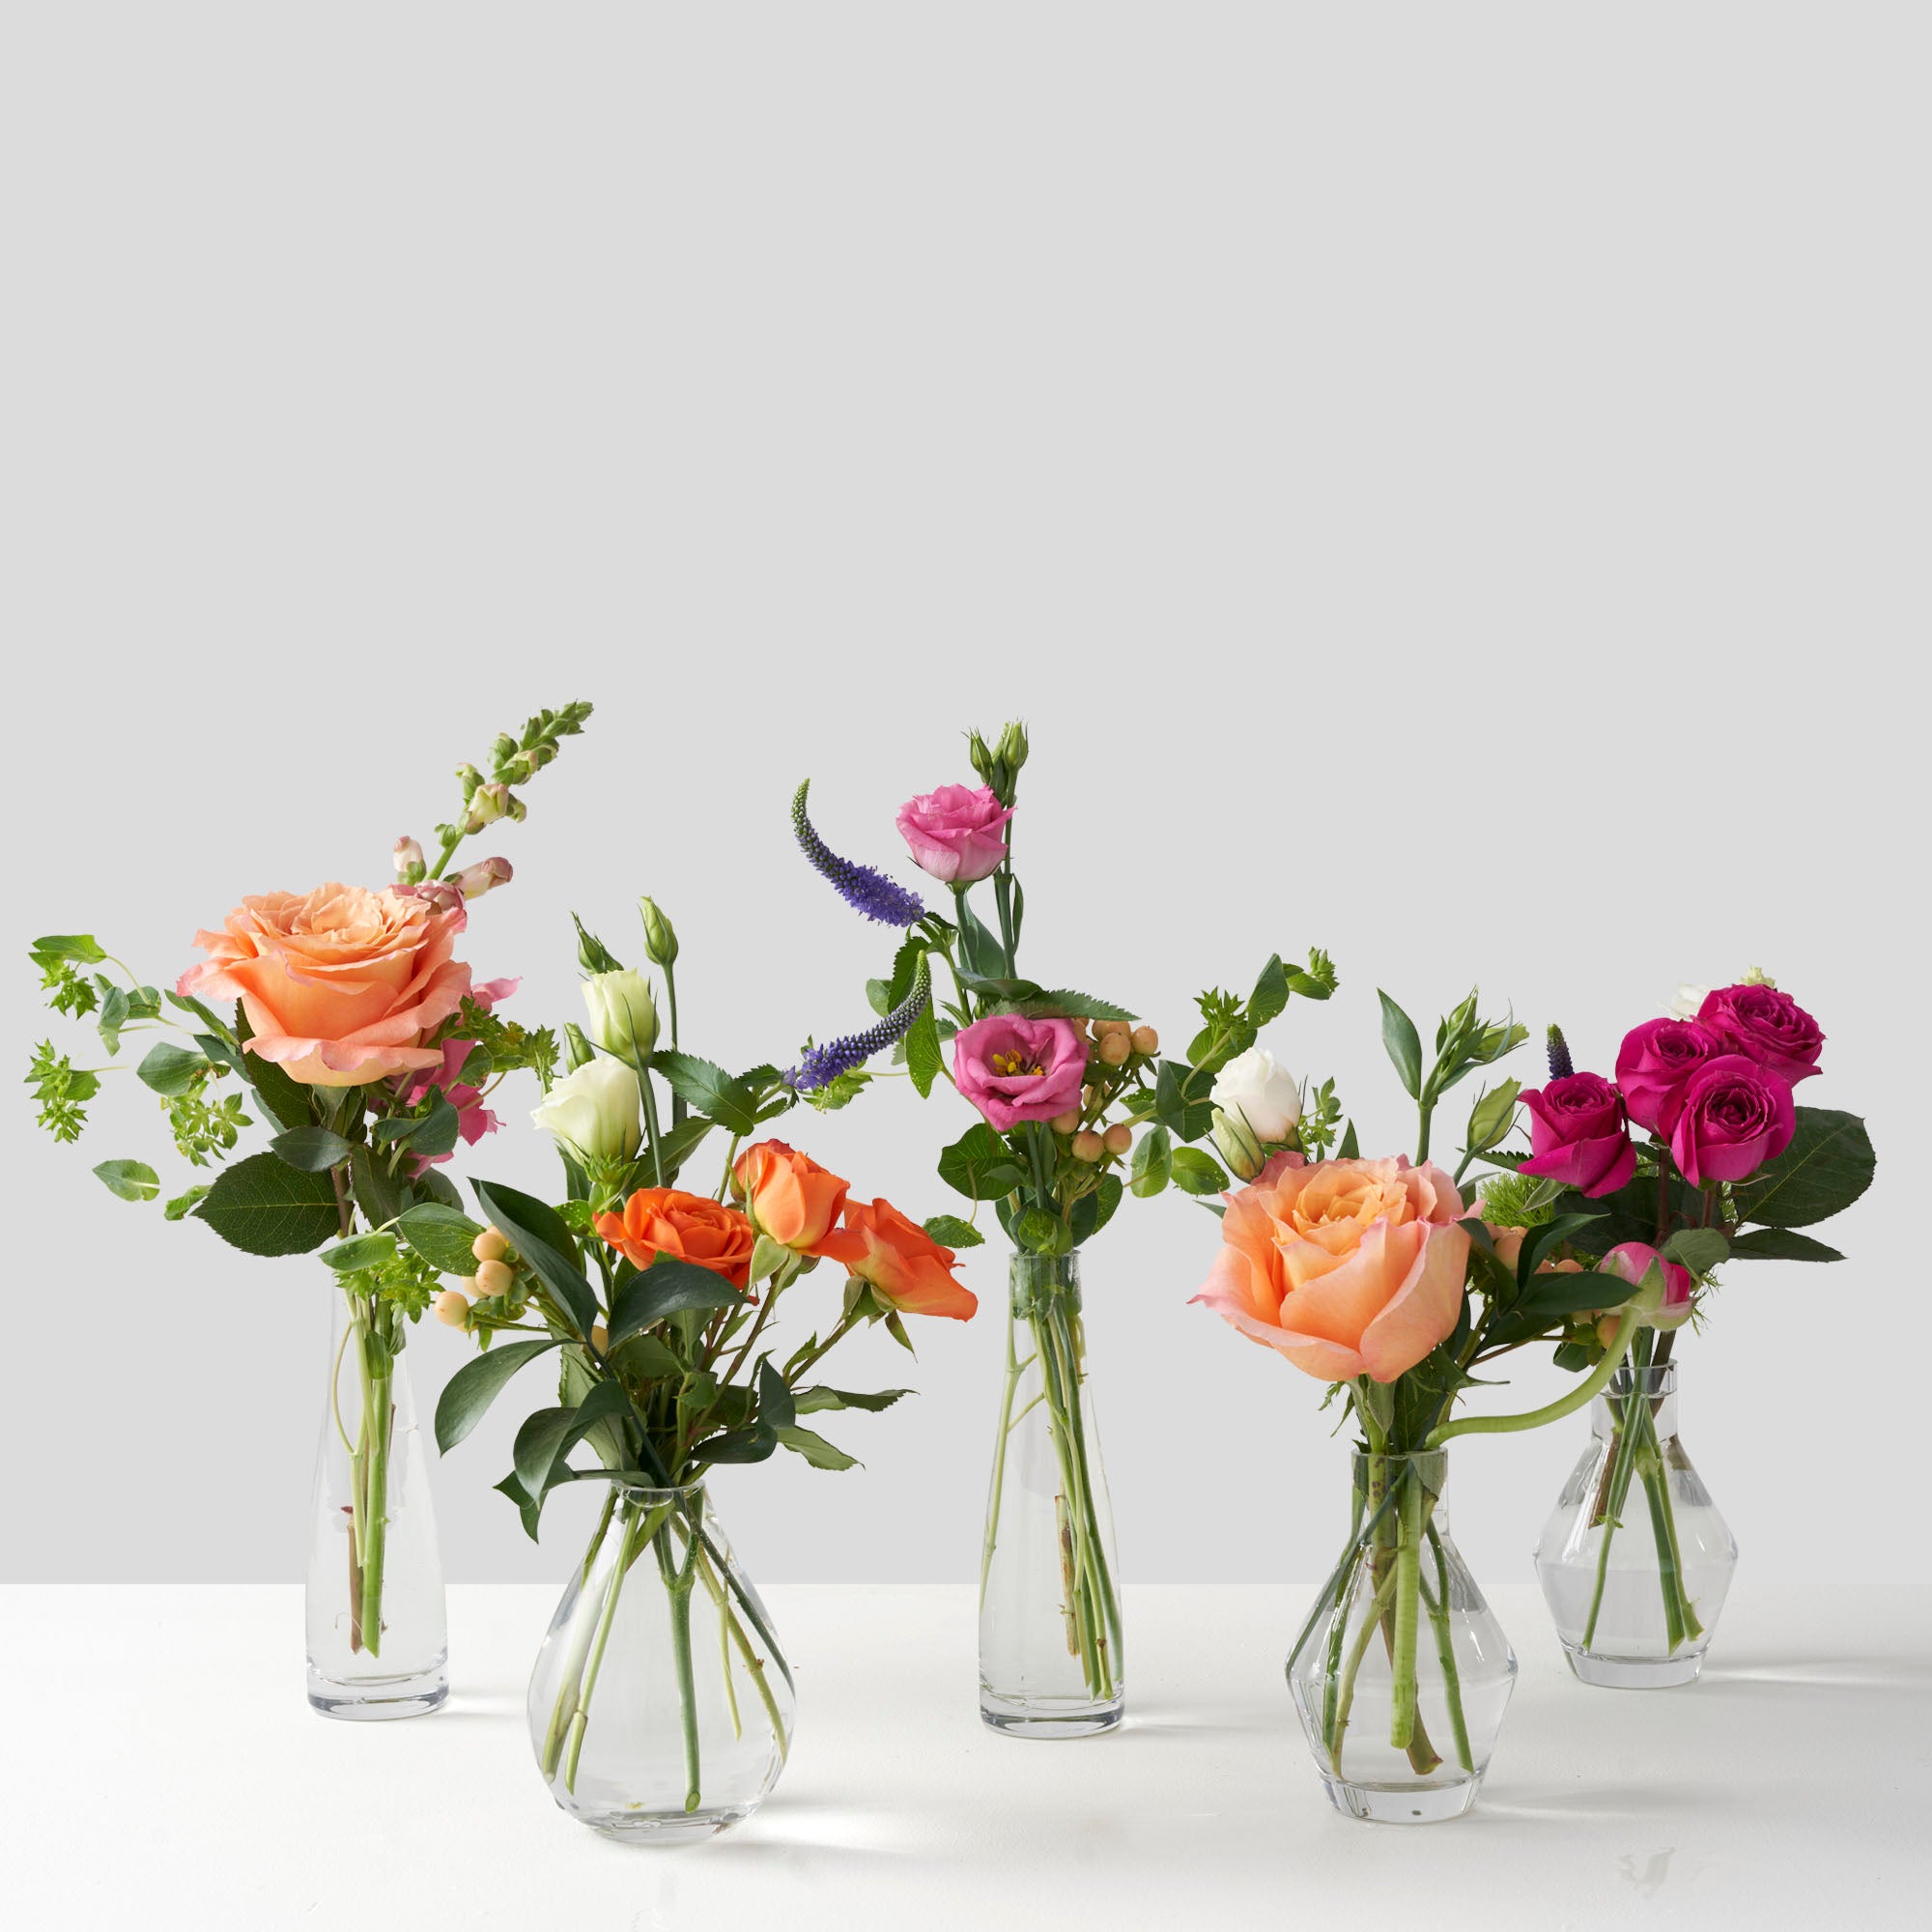 Five small vases in a row, containing orange, pink, and purple flowers including roses and lisianthus, on a white background.